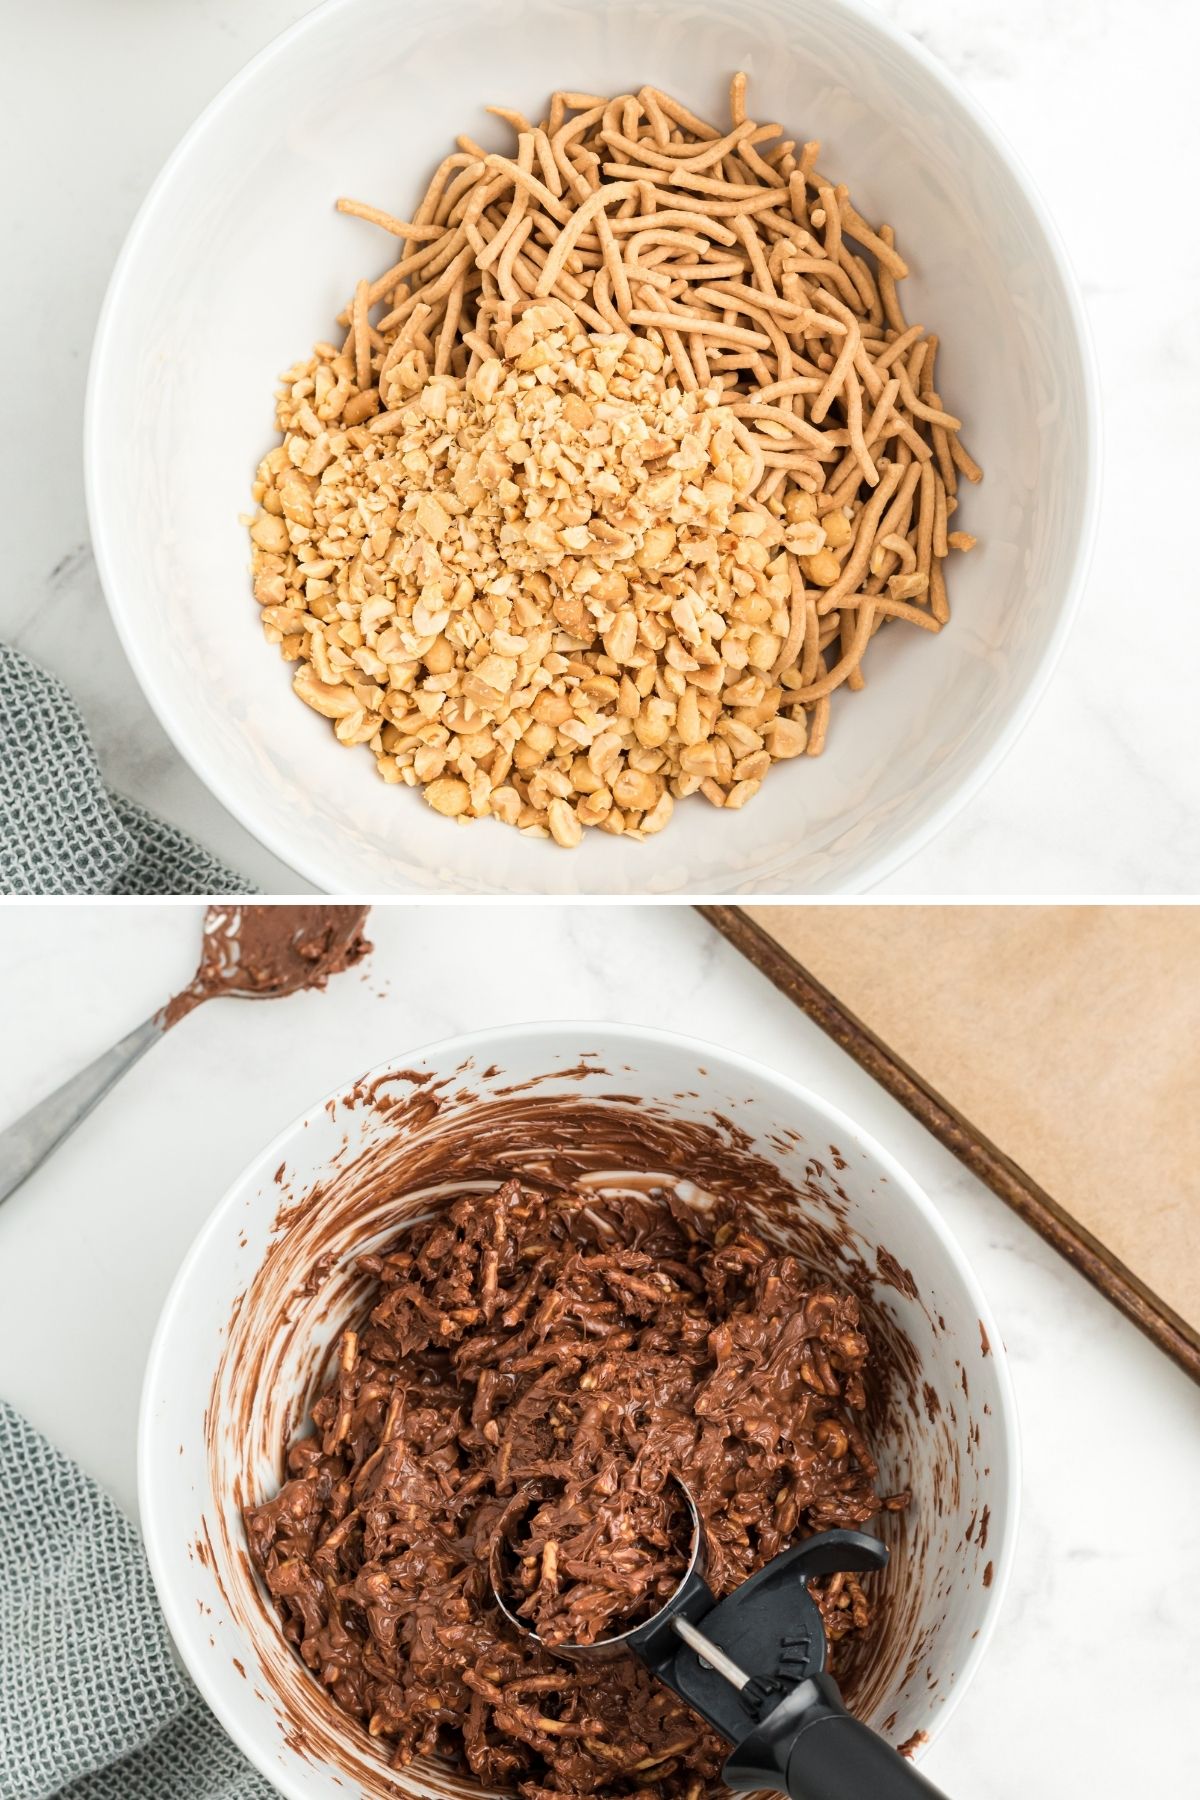 top: bowl with chow mein and chopped peanuts. Bottom: added melted chocolate with cookie scoop